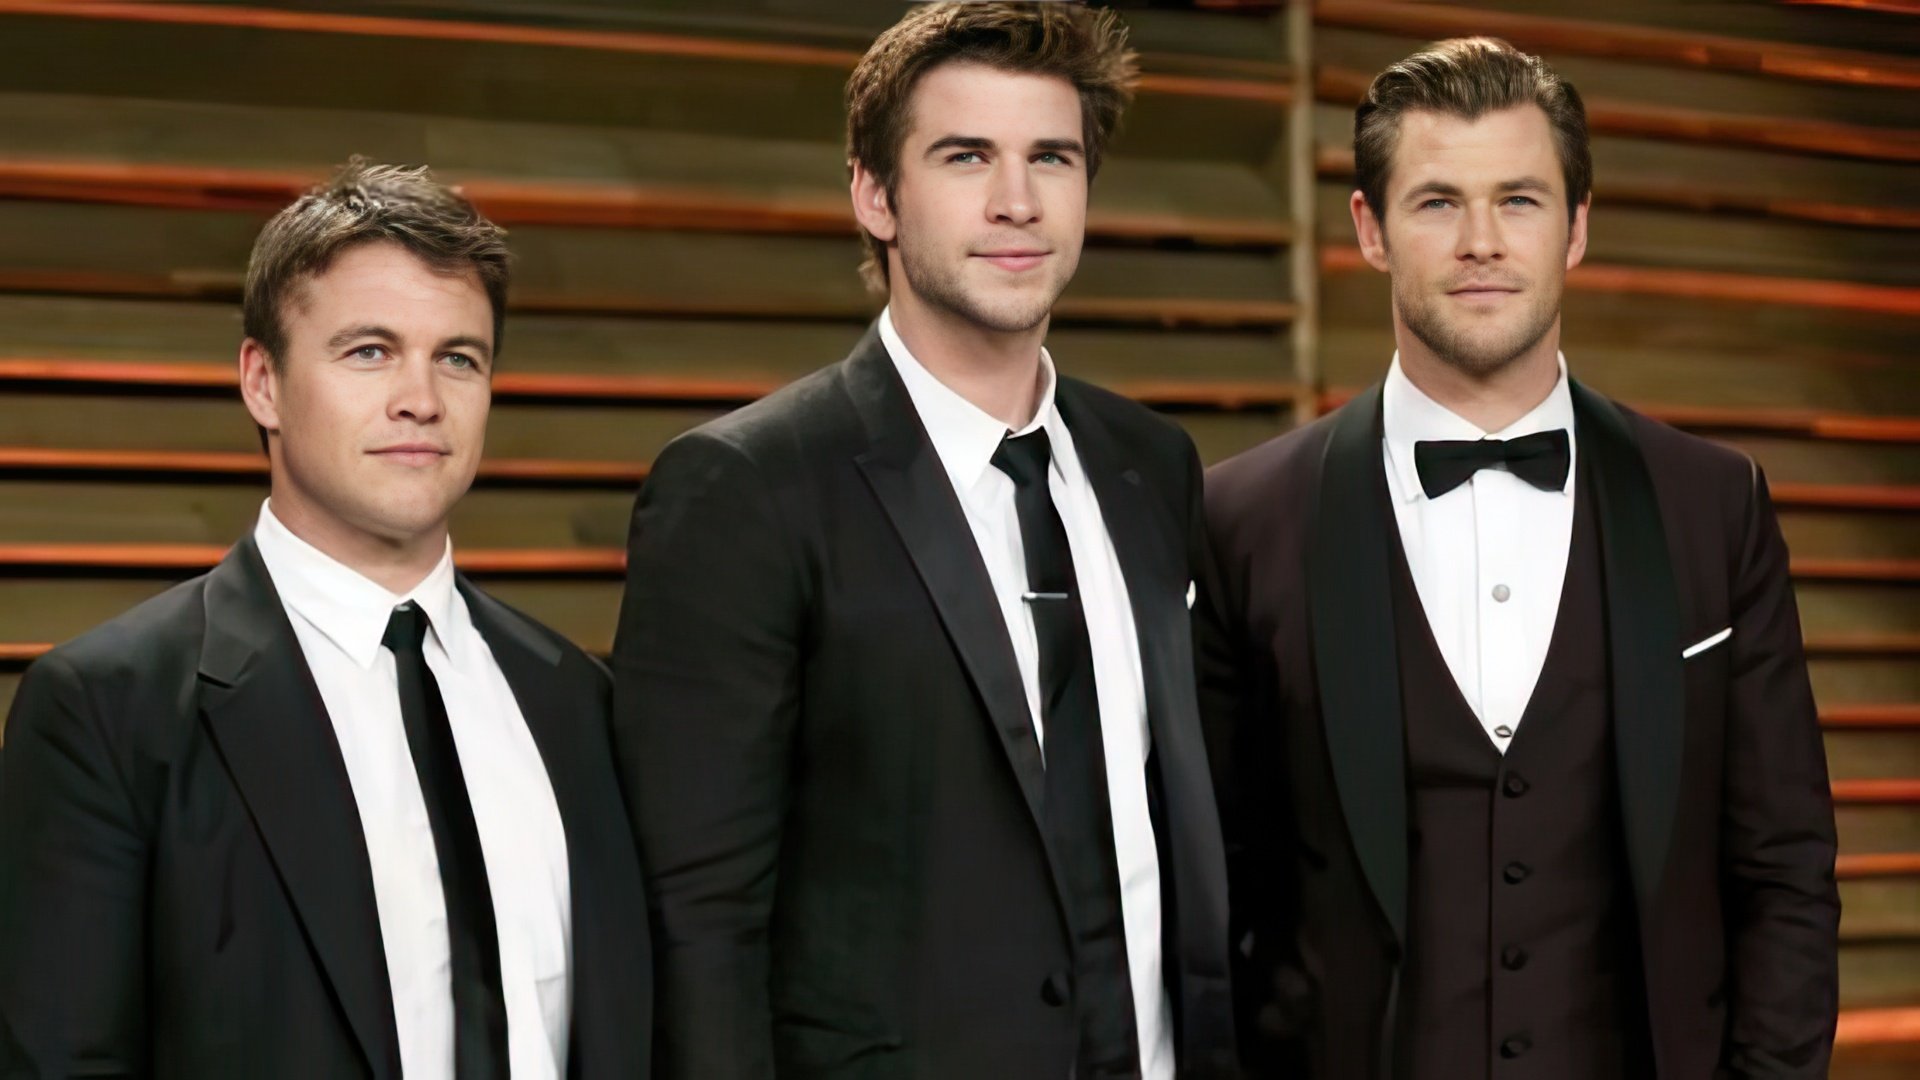 Liam (center) is the youngest of the Hemsworth brothers